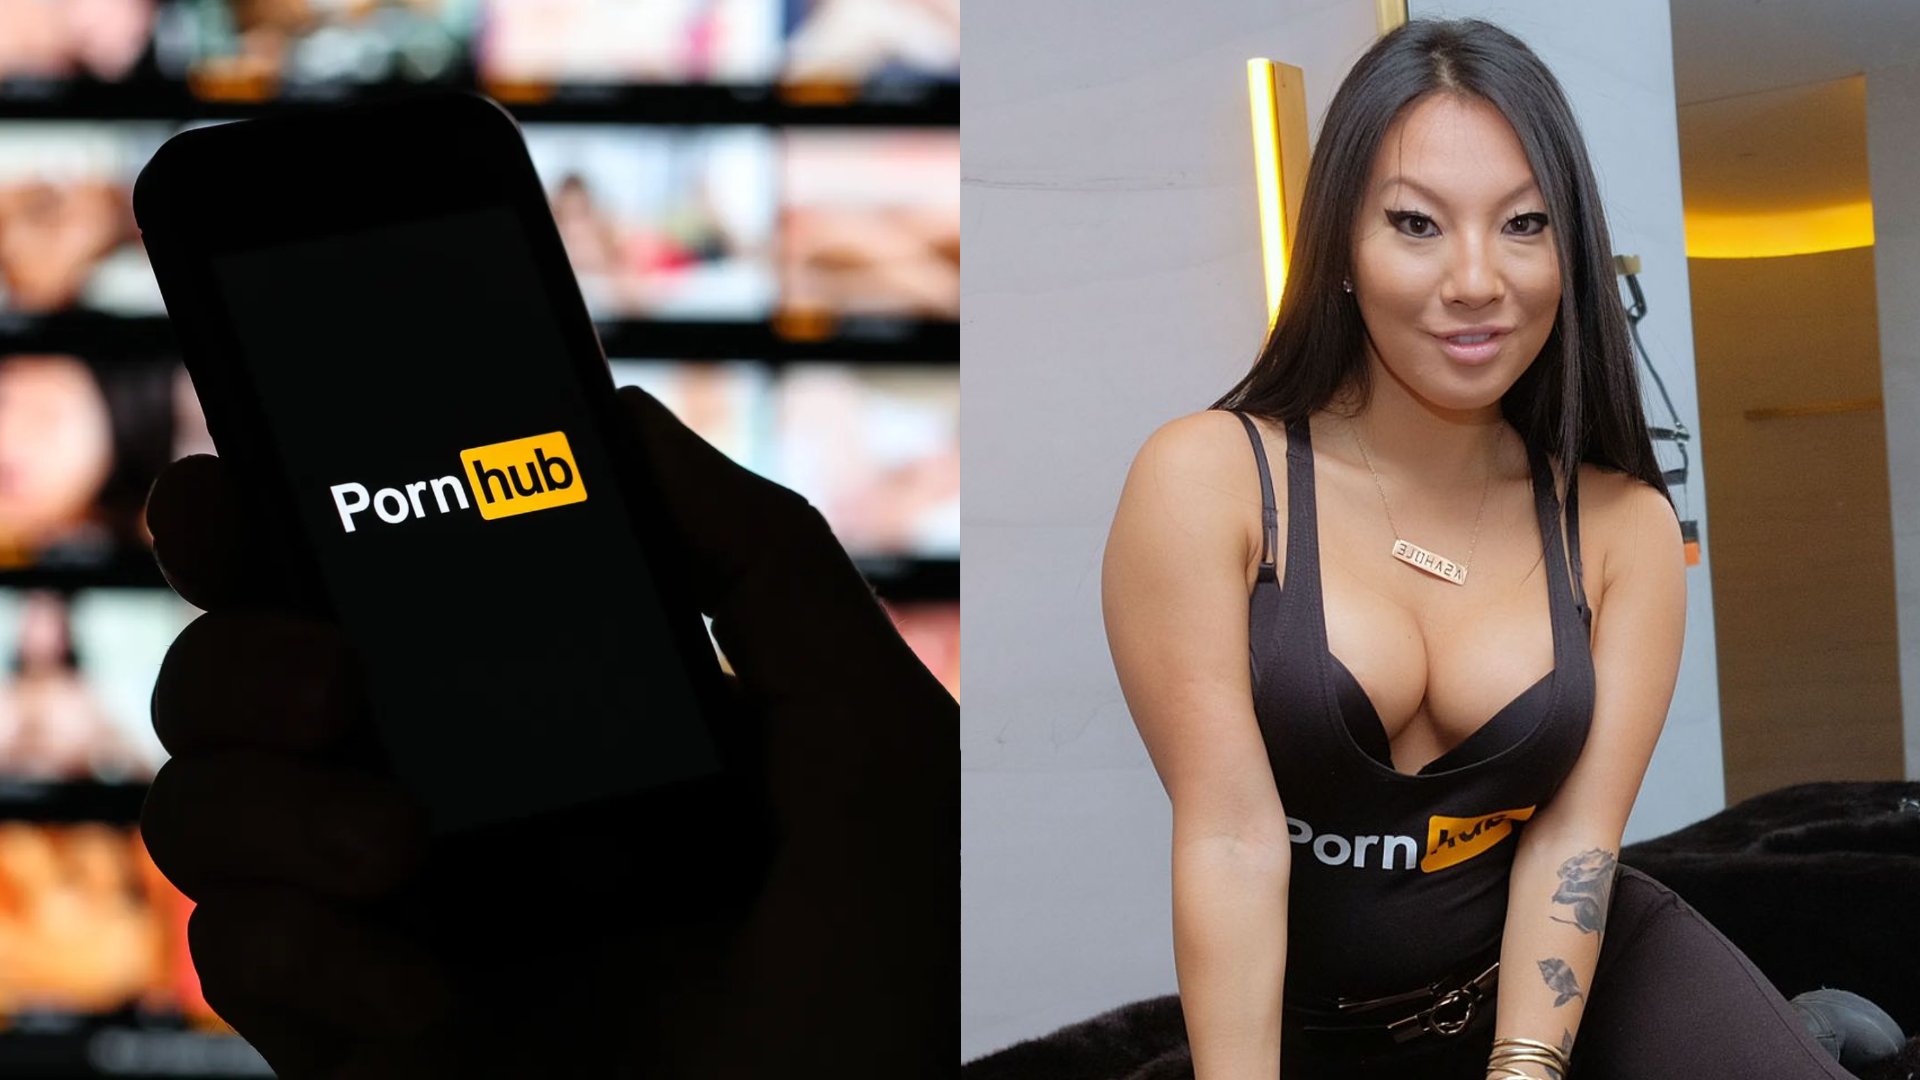 Puornhub - Pornhub Sold To Private Equity Firm For Undisclosed Amount